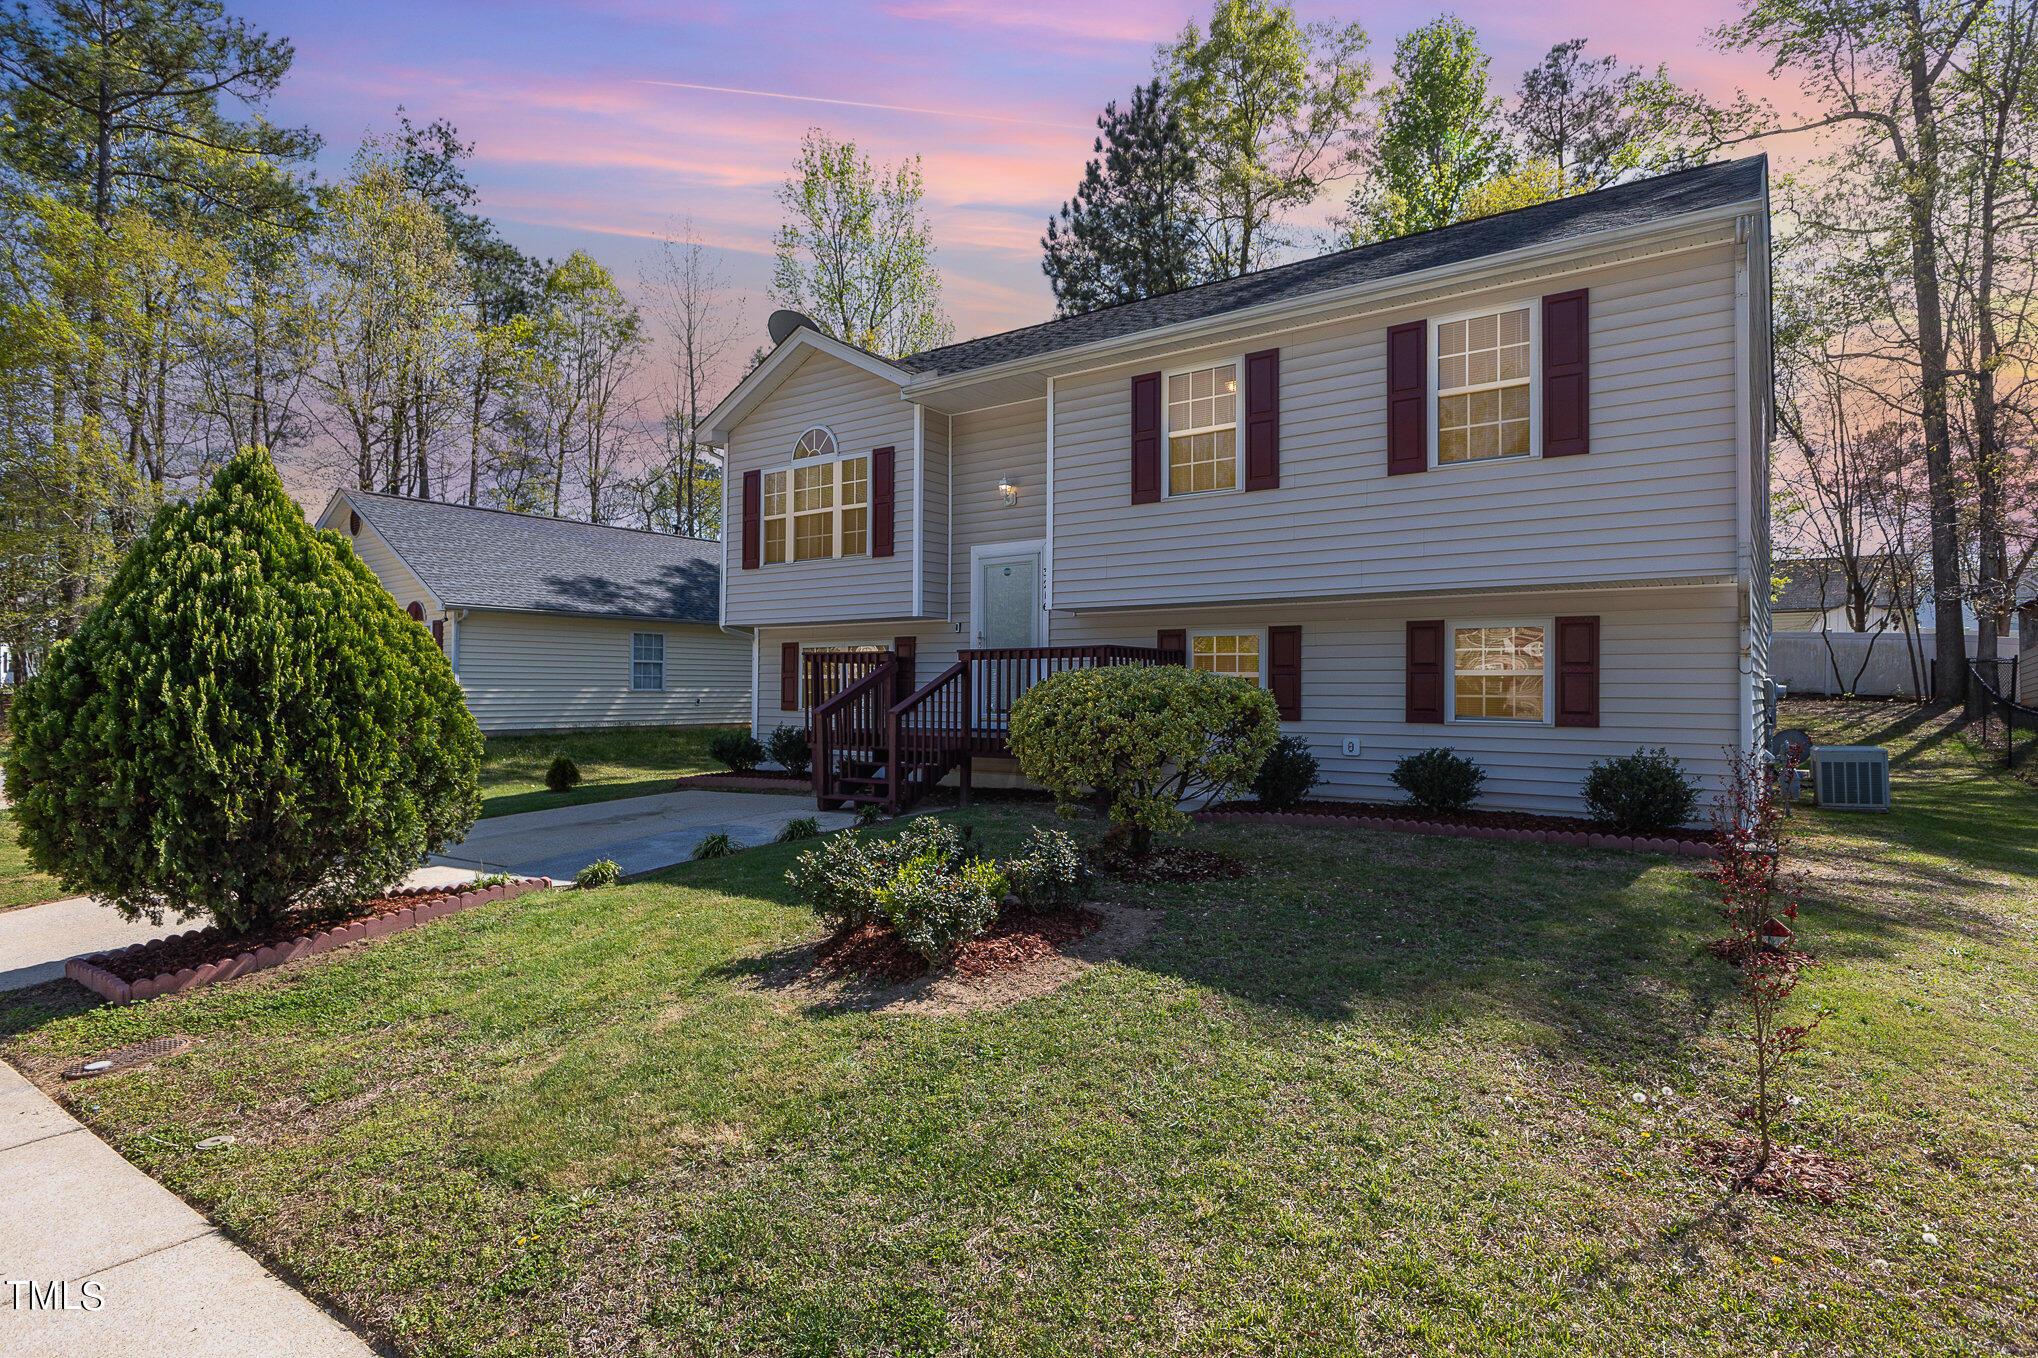 Photo one of 3216 Slippery Elm Dr Raleigh NC 27610 | MLS 10022716